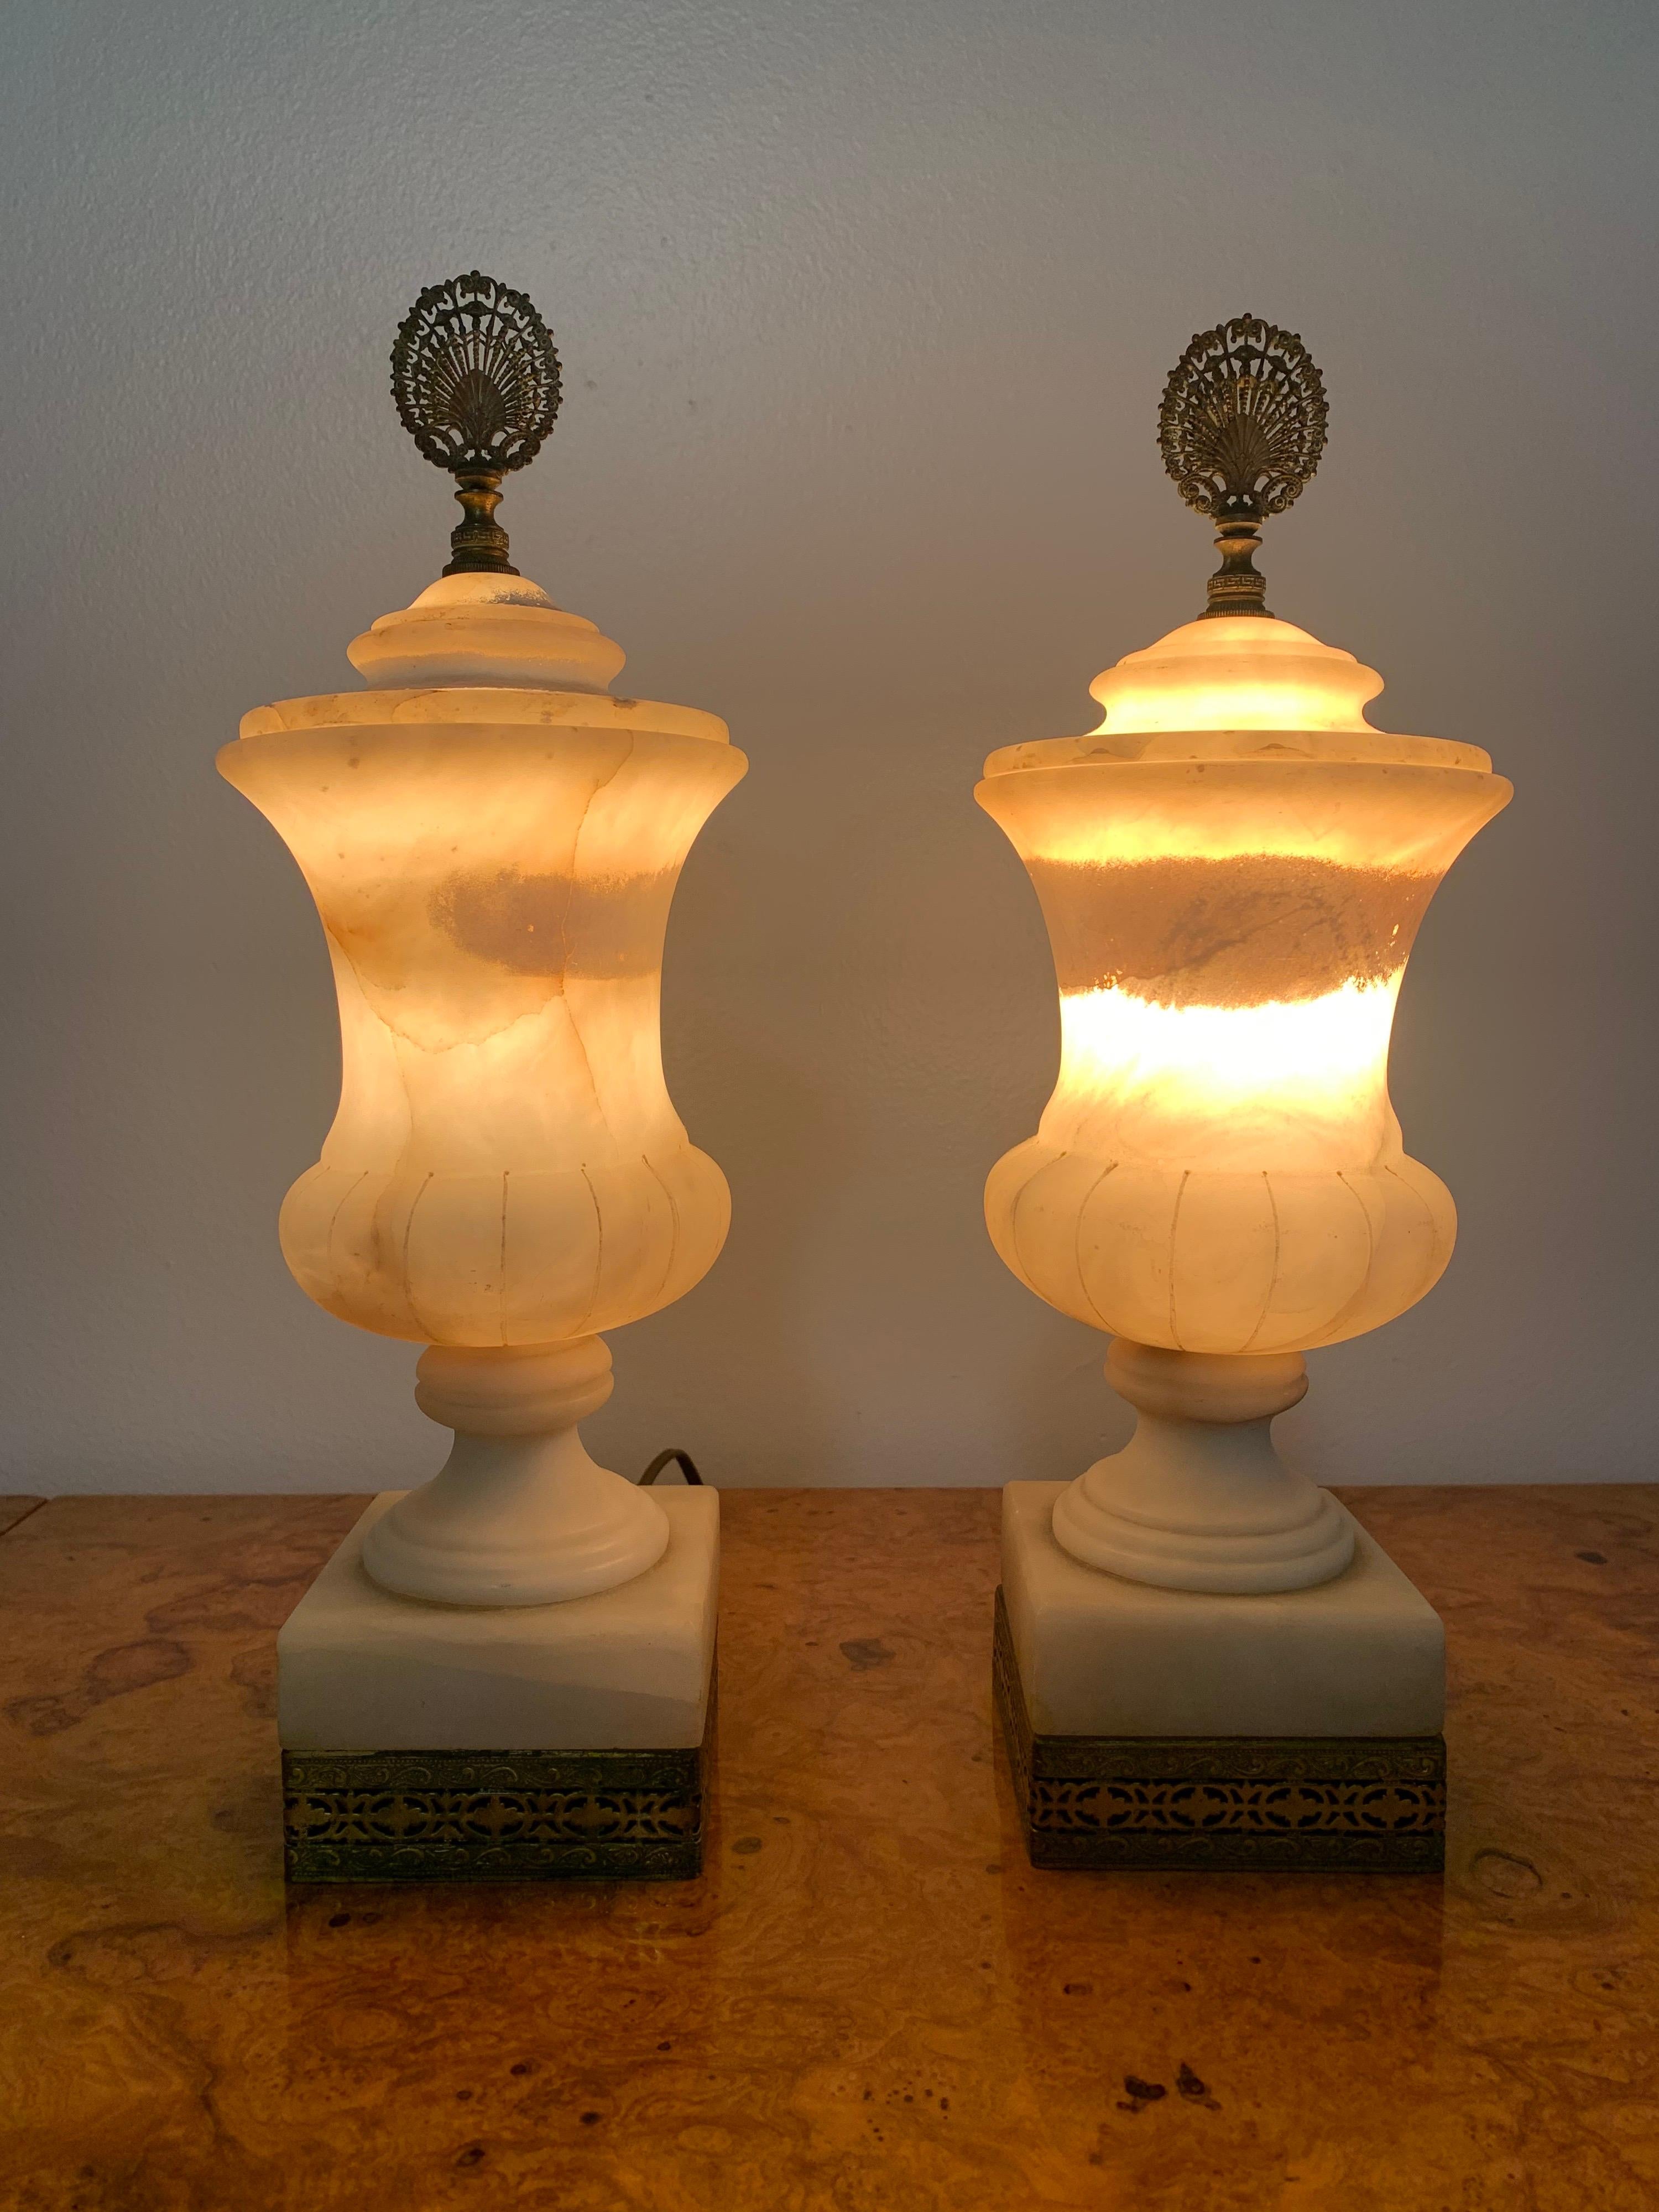 Gorgeous pair of Alabaster lidded urn lamps. Masterfully carved with amazing form. Aging gracefully resulting in a light caramel coloring and bringing. Ornate brass fixtures on the top and bottom accenting the form and color of the urns. 

Hand